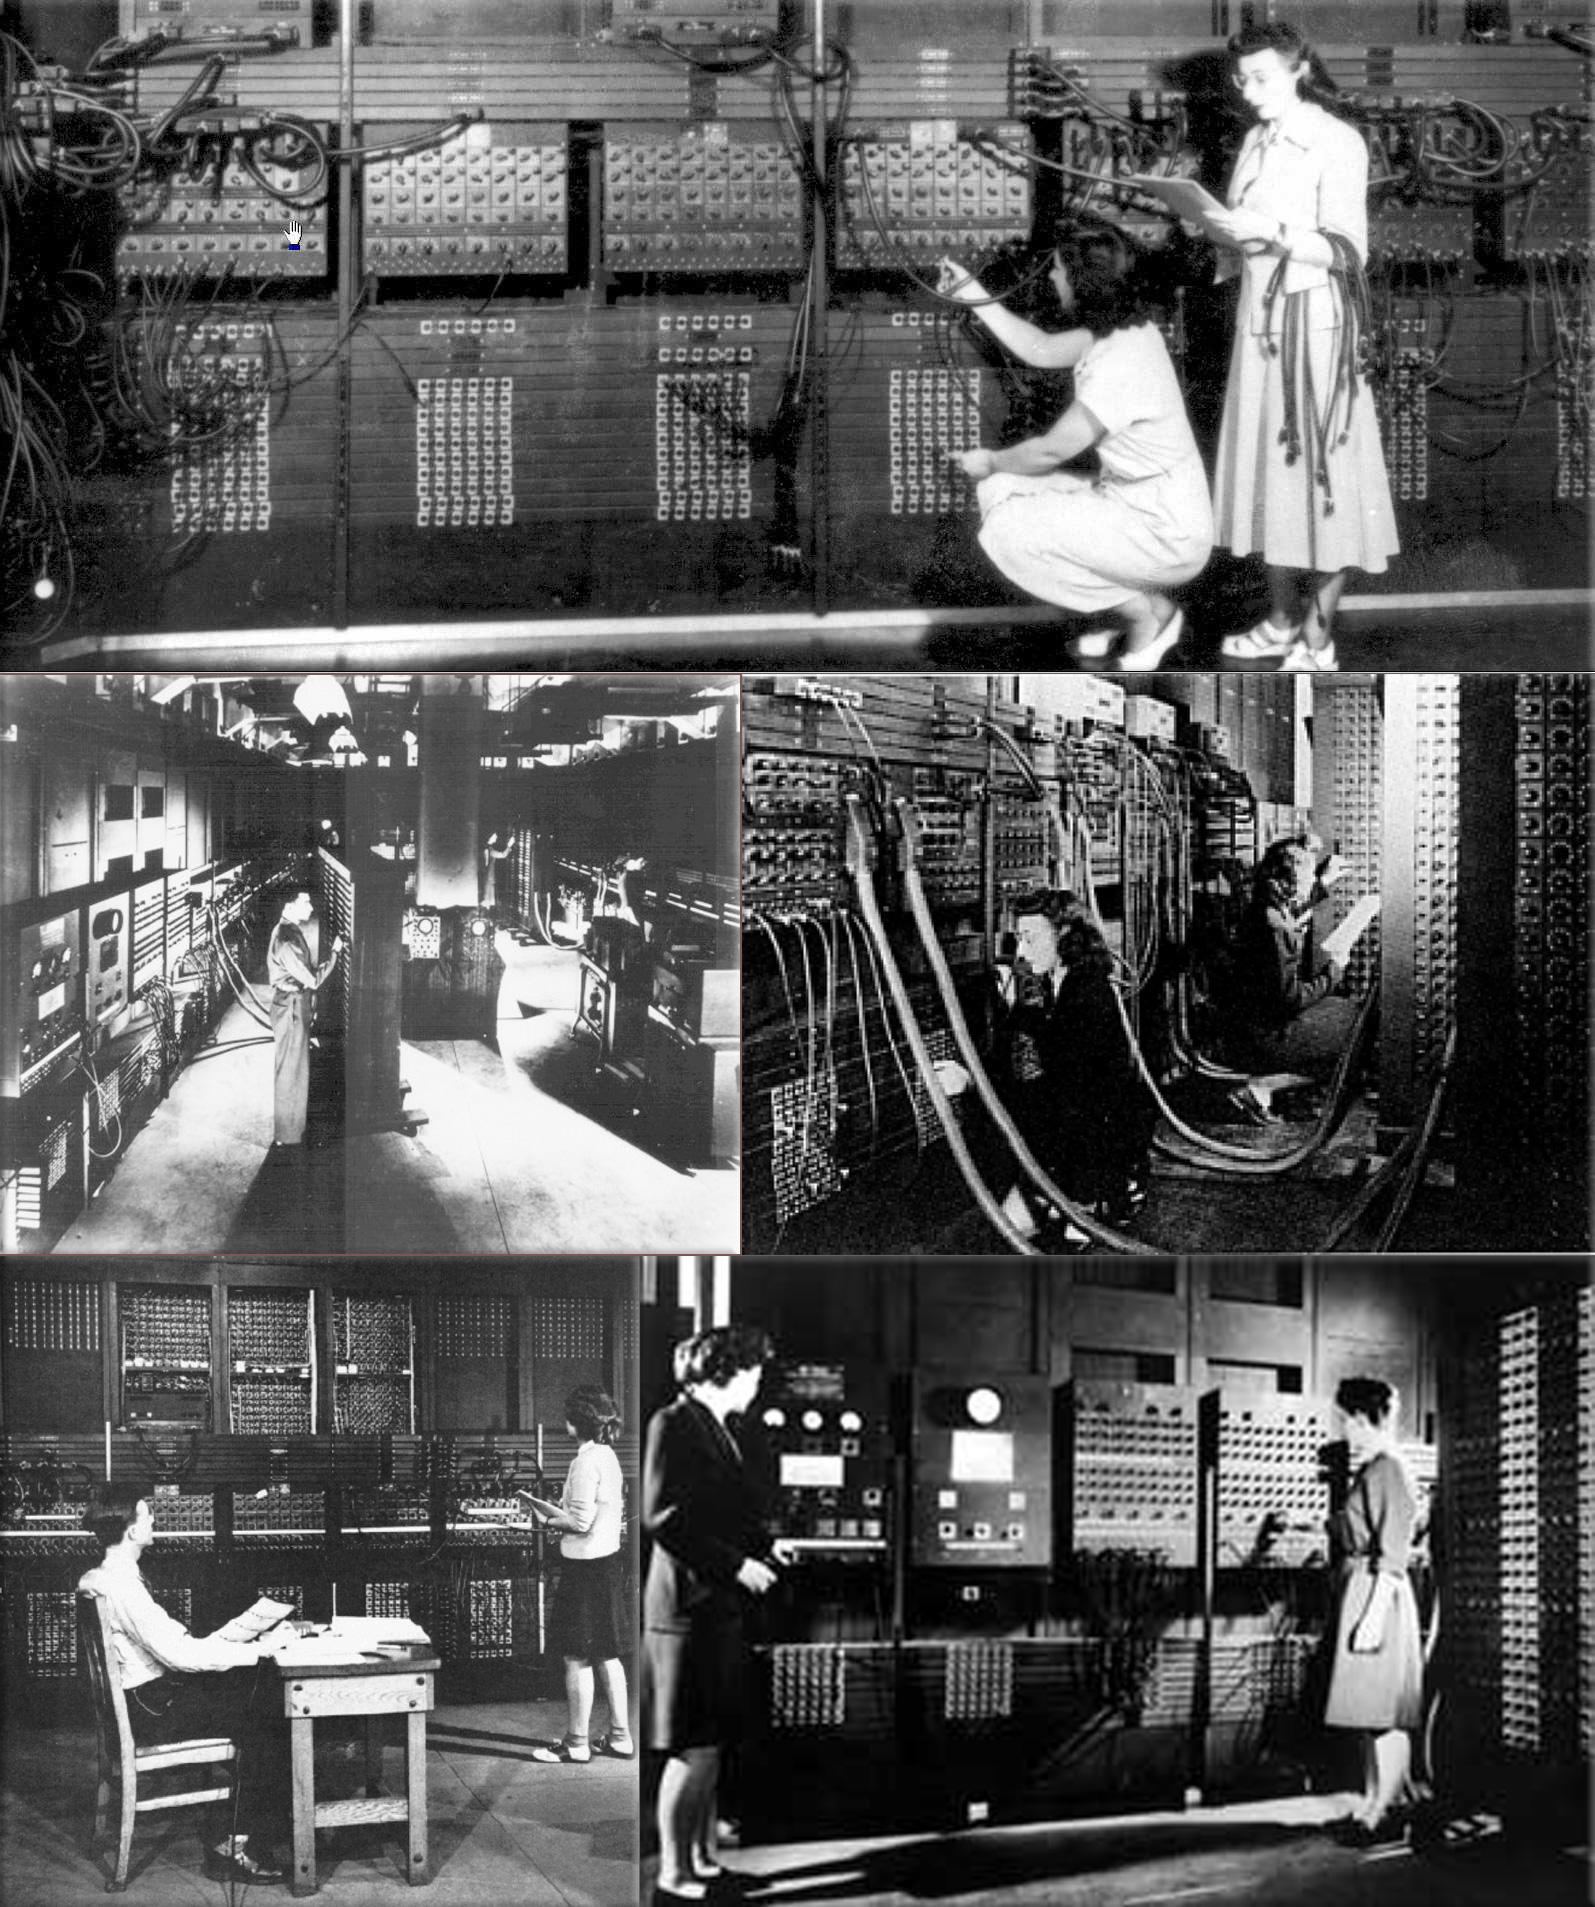 ENIAC (Electronic Numerical Integrator And Computer) the first electronic general-purpose computer